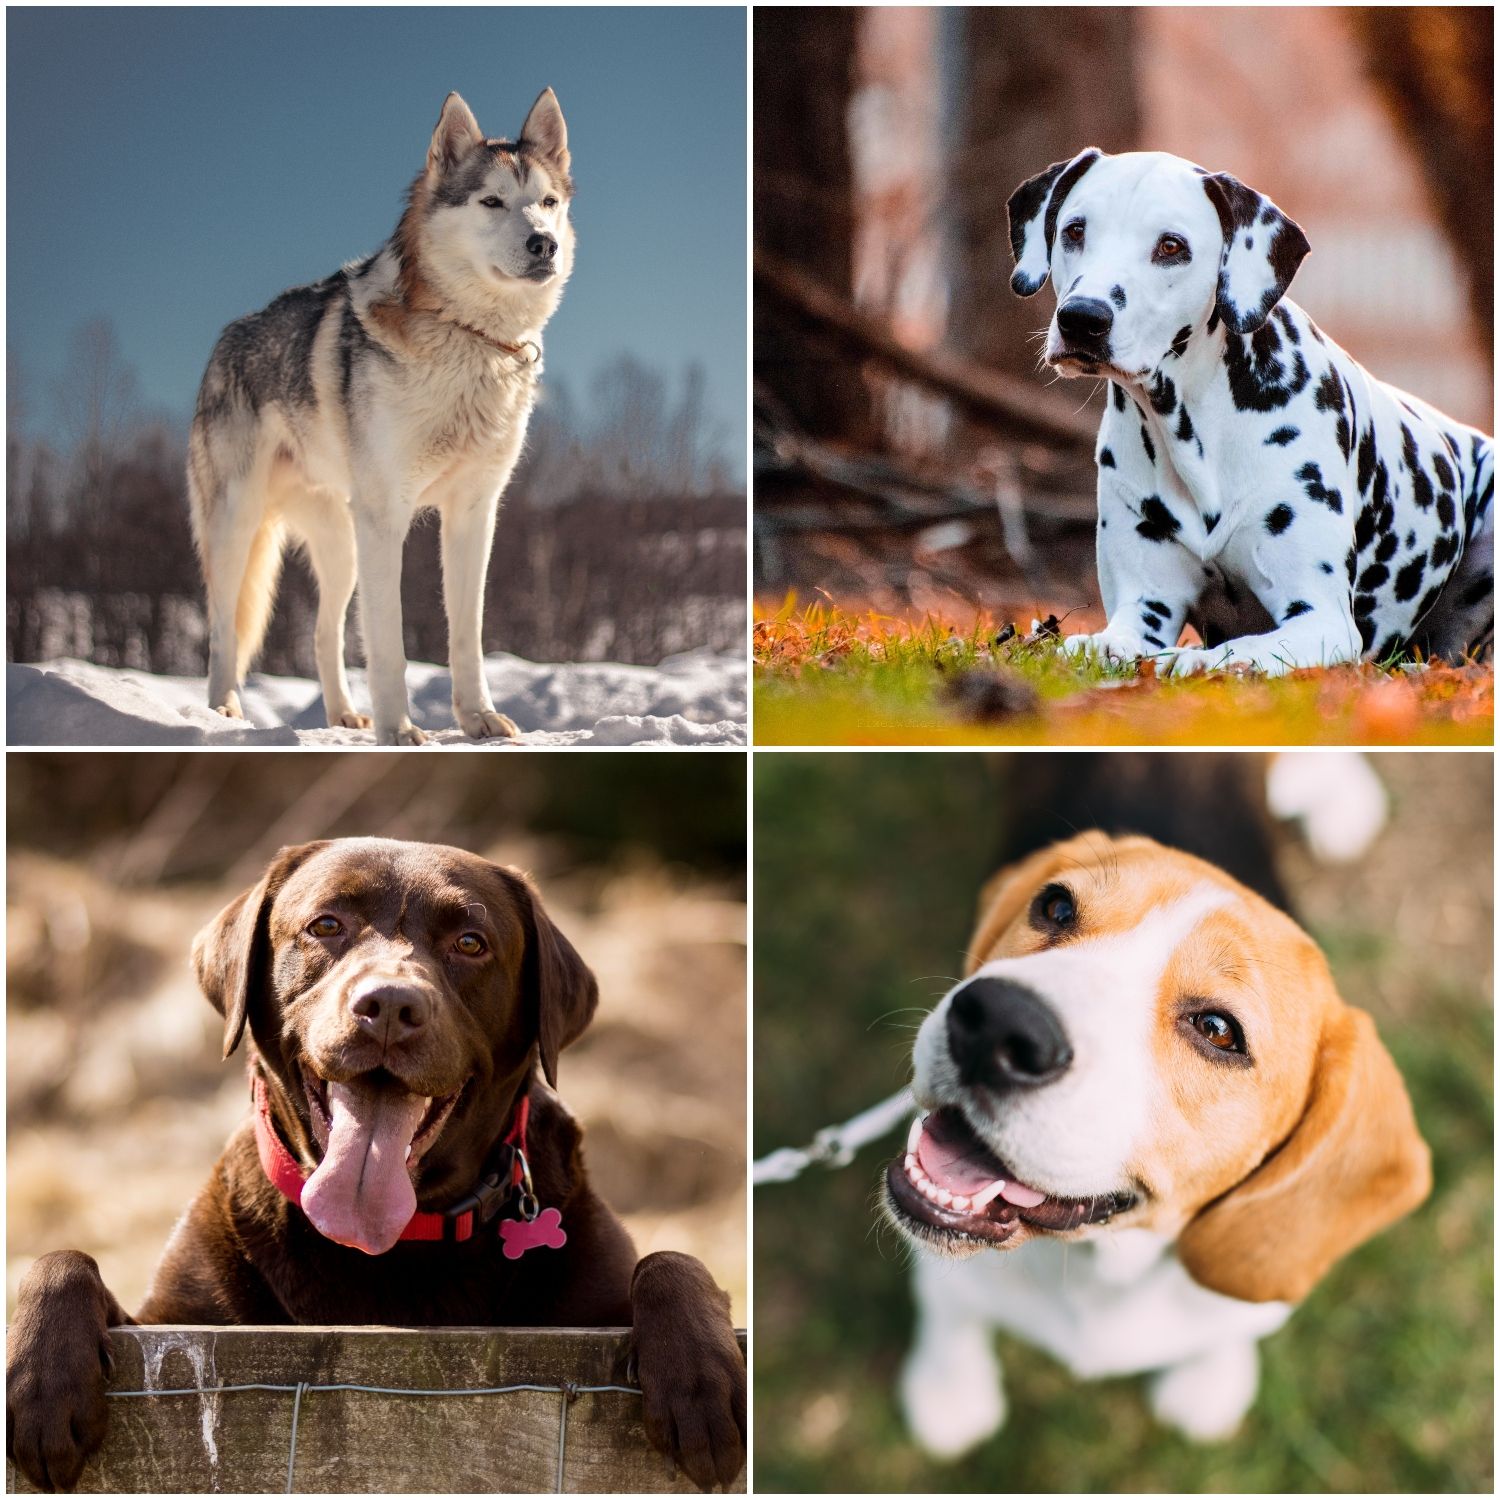 Top 14 Dog Breeds for Reducing Stress in Owners